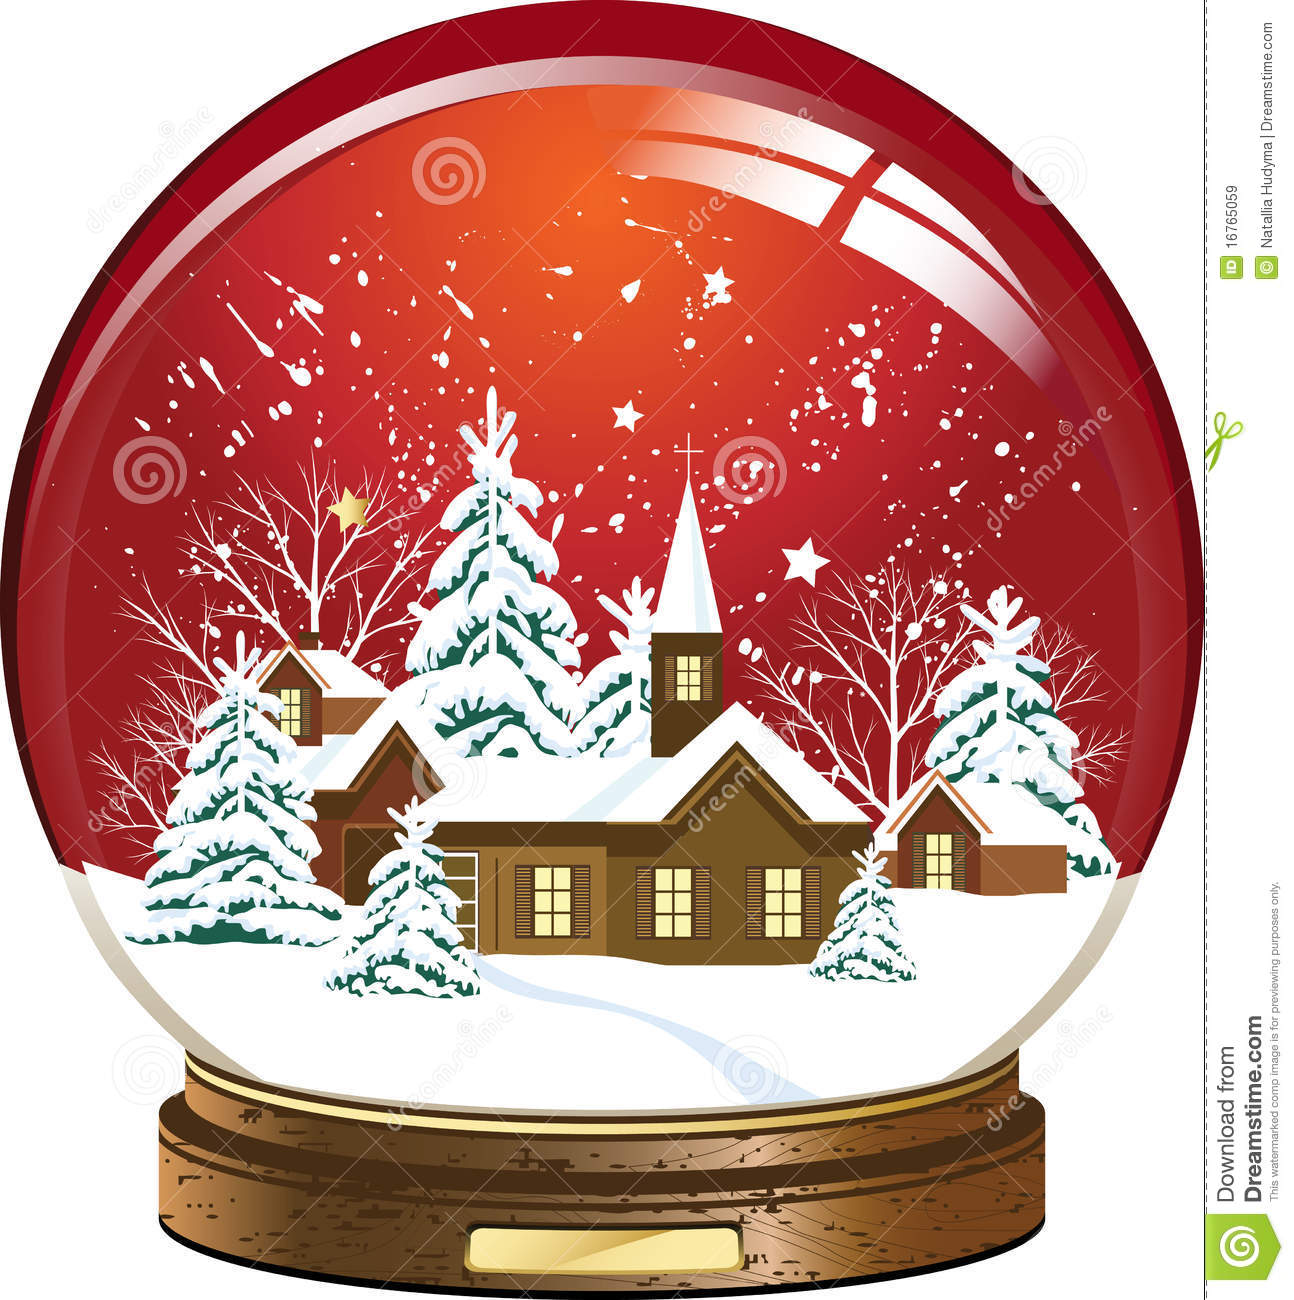 Snow Globe With A Town  All Elements And Textures Are Individual